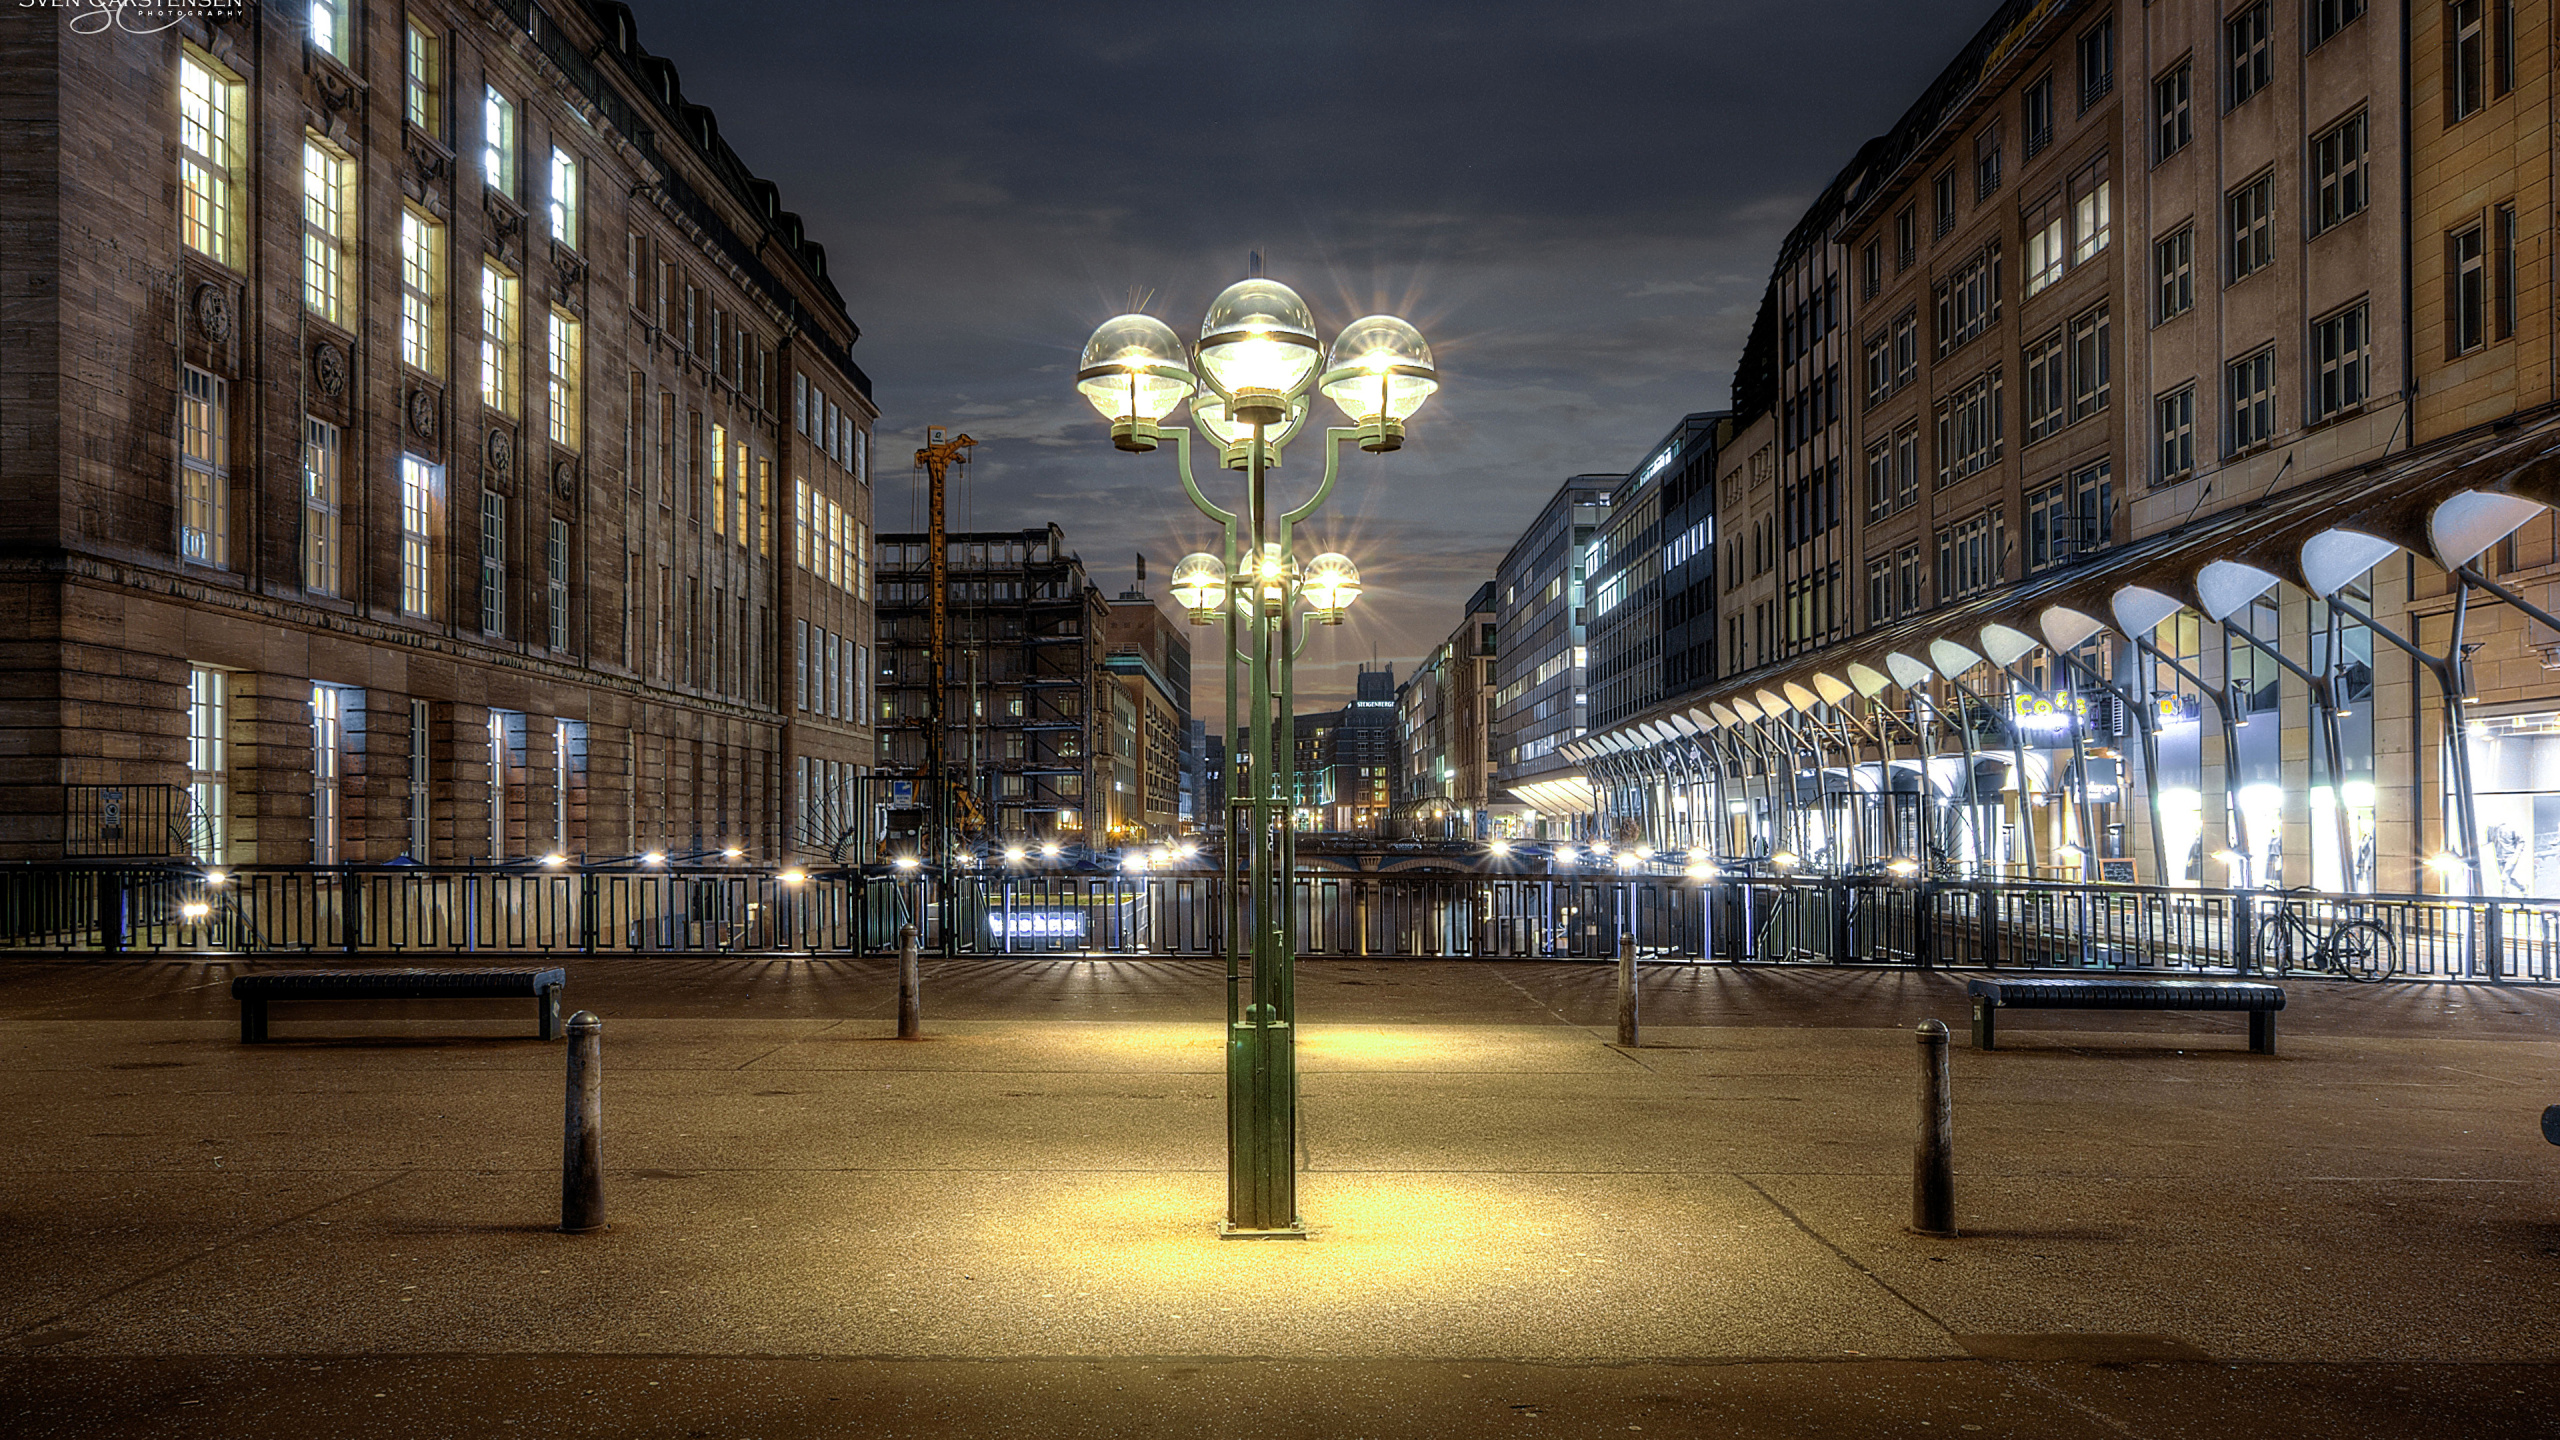 Lighted Street Lights in The Middle of The City During Night Time. Wallpaper in 2560x1440 Resolution